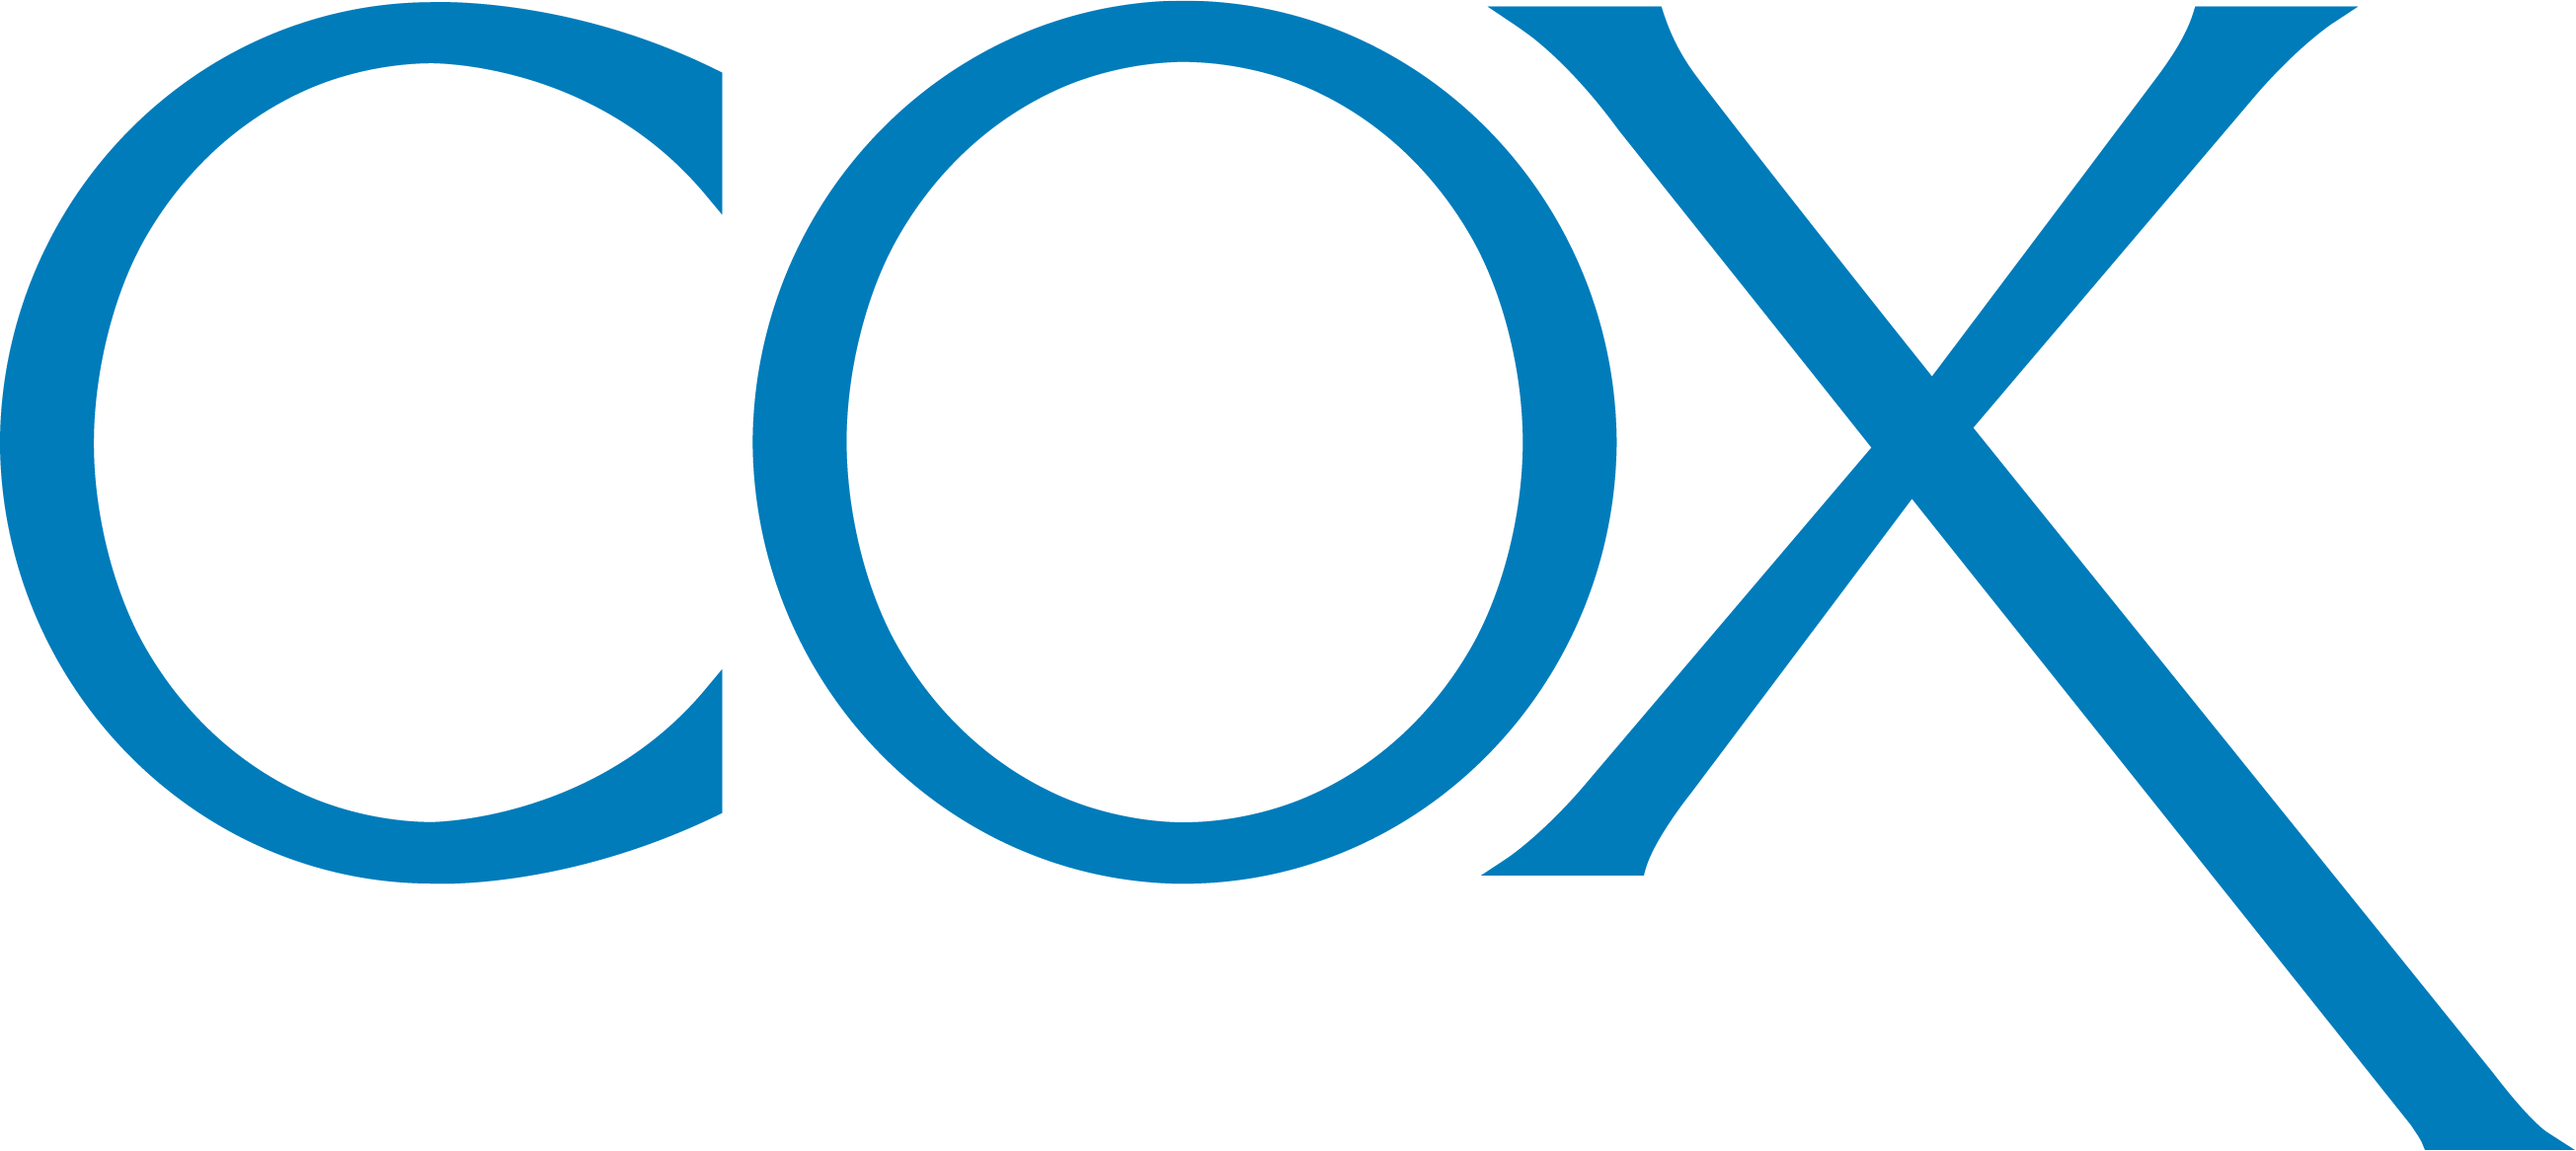 Cox-only